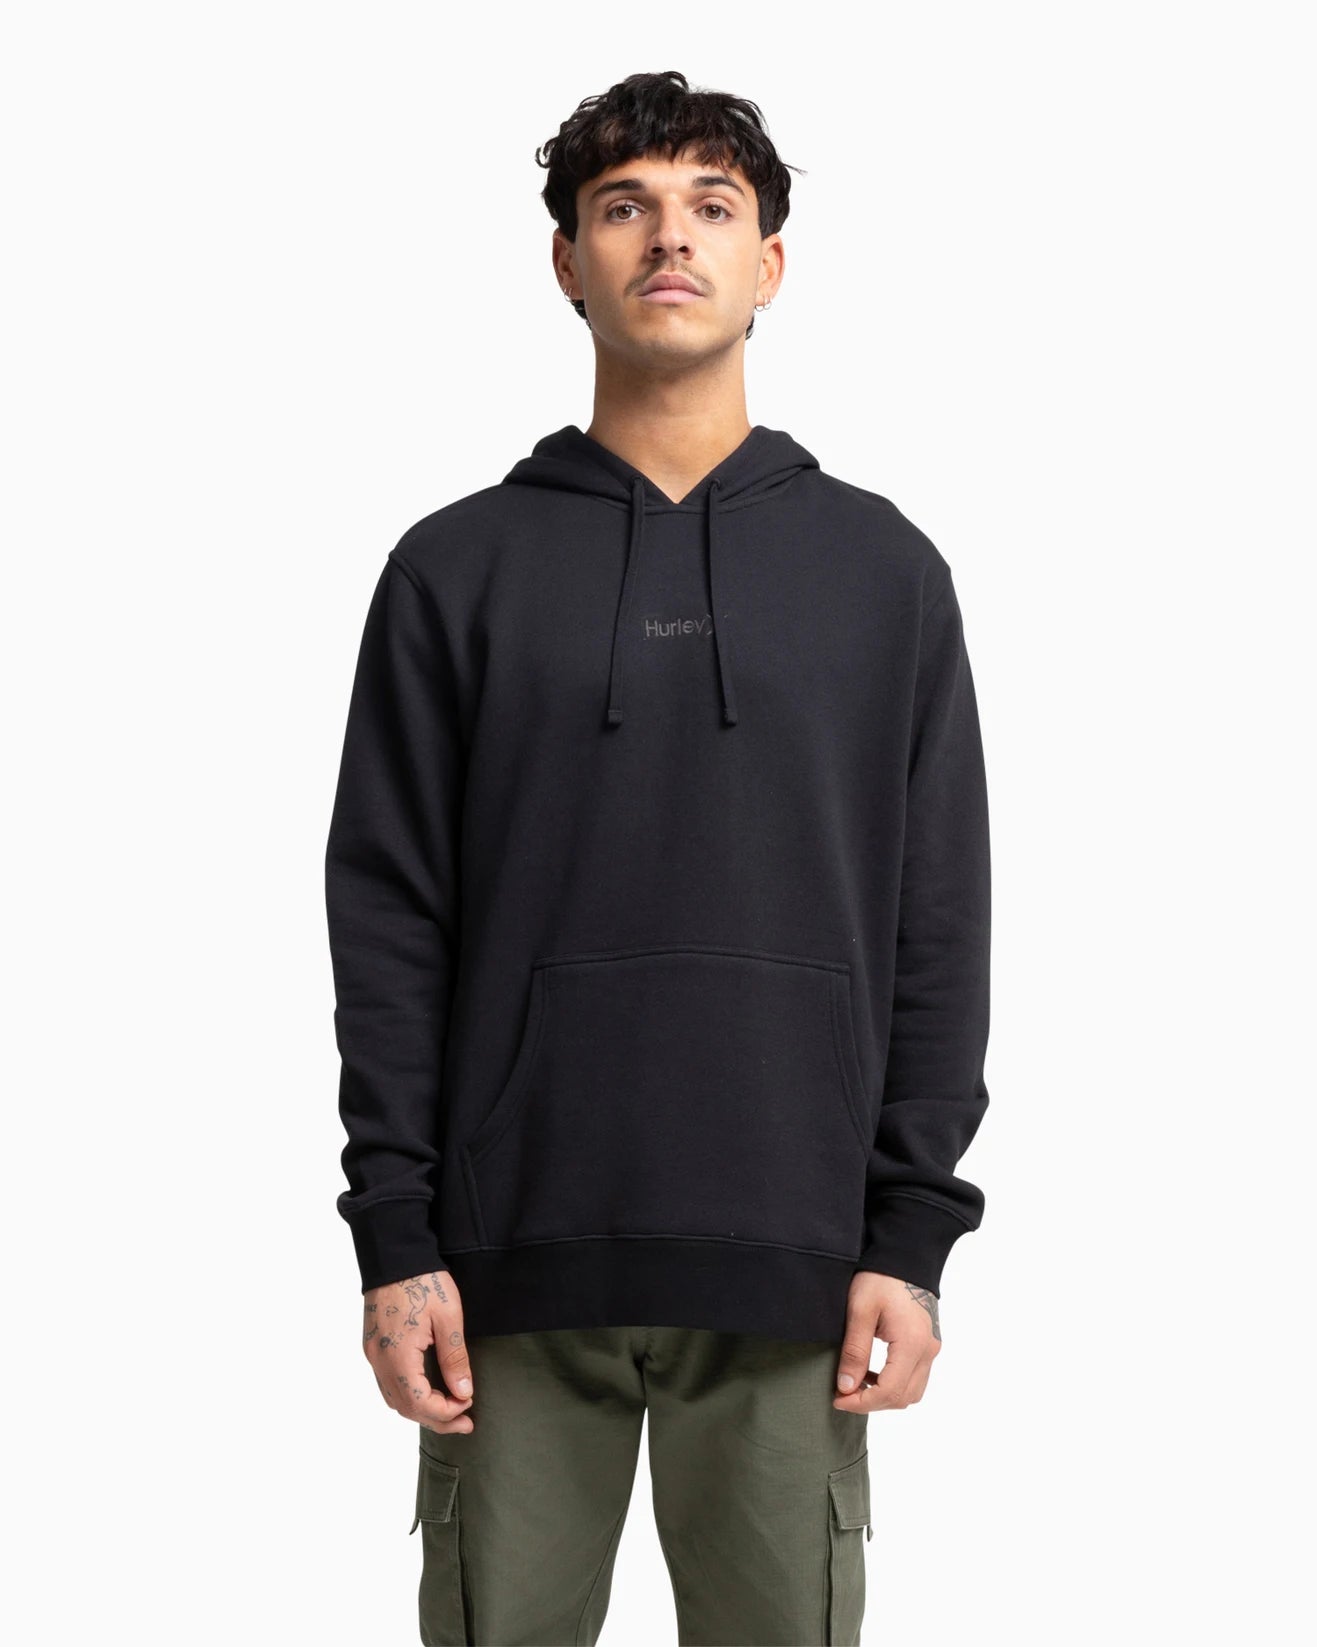 one and only mens black hoodie, hurley